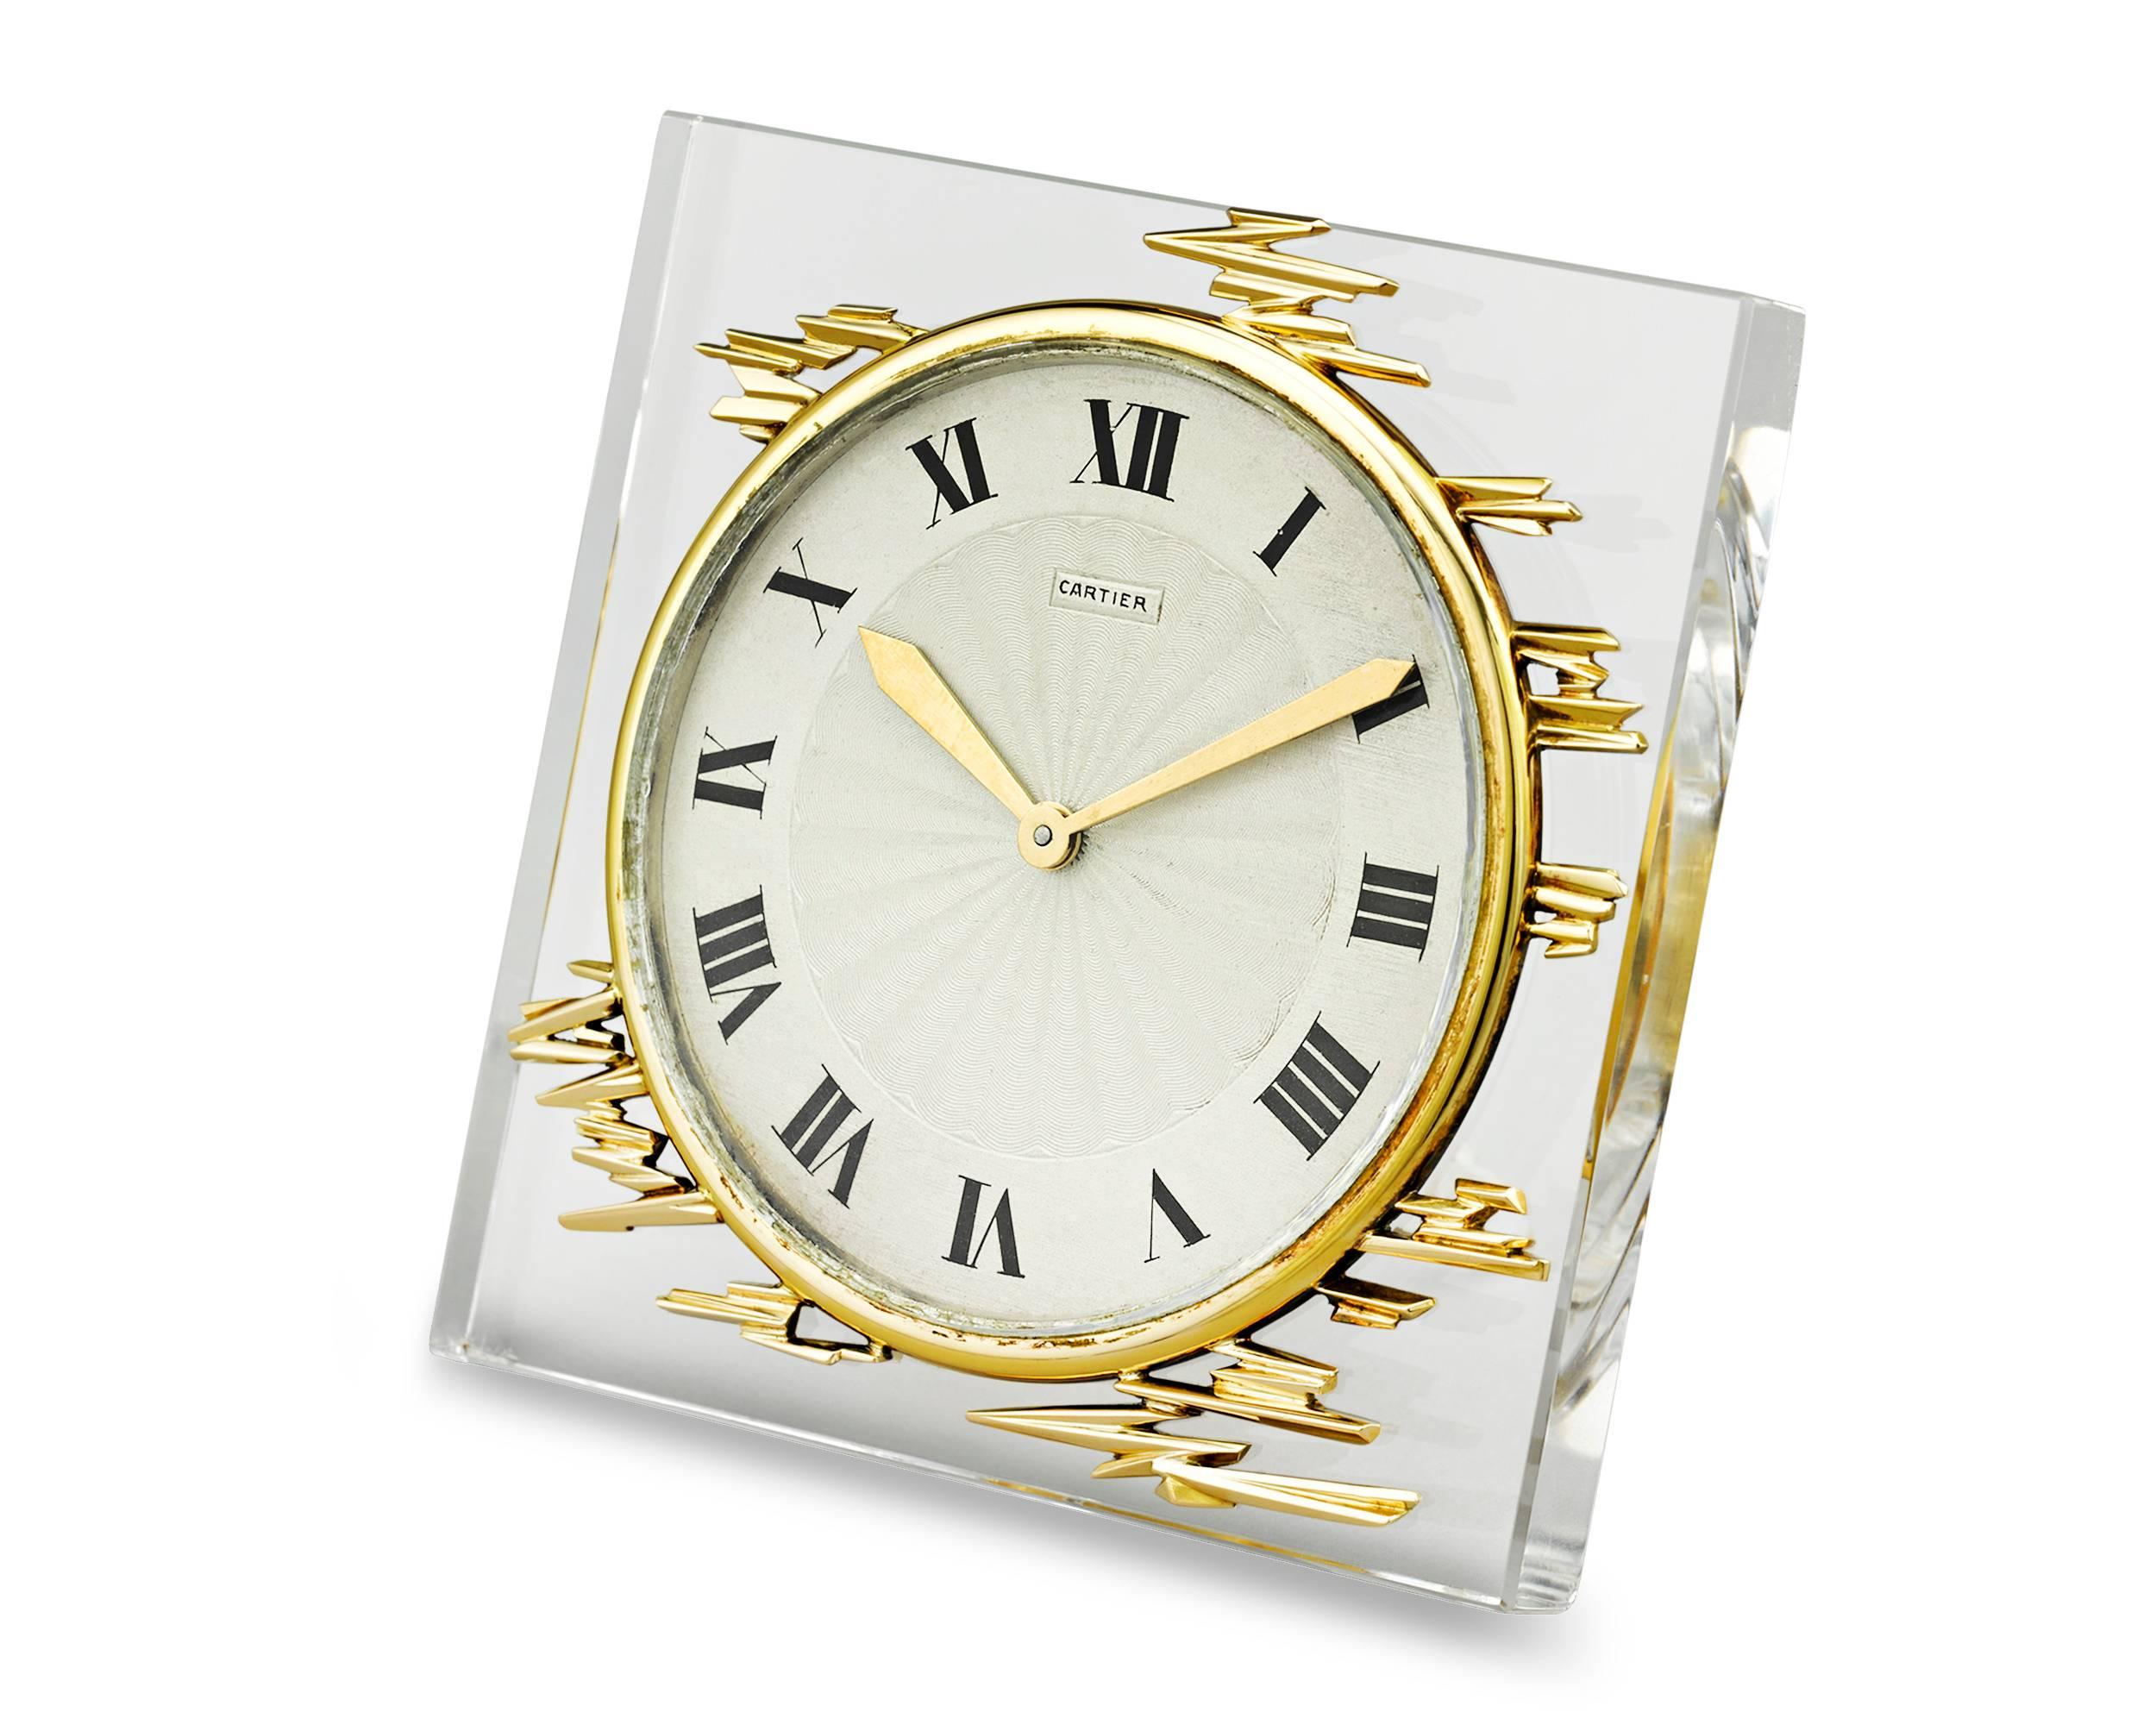 This rare and stylish desk clock epitomizes the timeless elegance of Cartier. Its sleek, retro design, featuring a crystal frame and golden accents, is immediately striking. Roman numerals mark the hours on the white enamel dial, while hands crafted